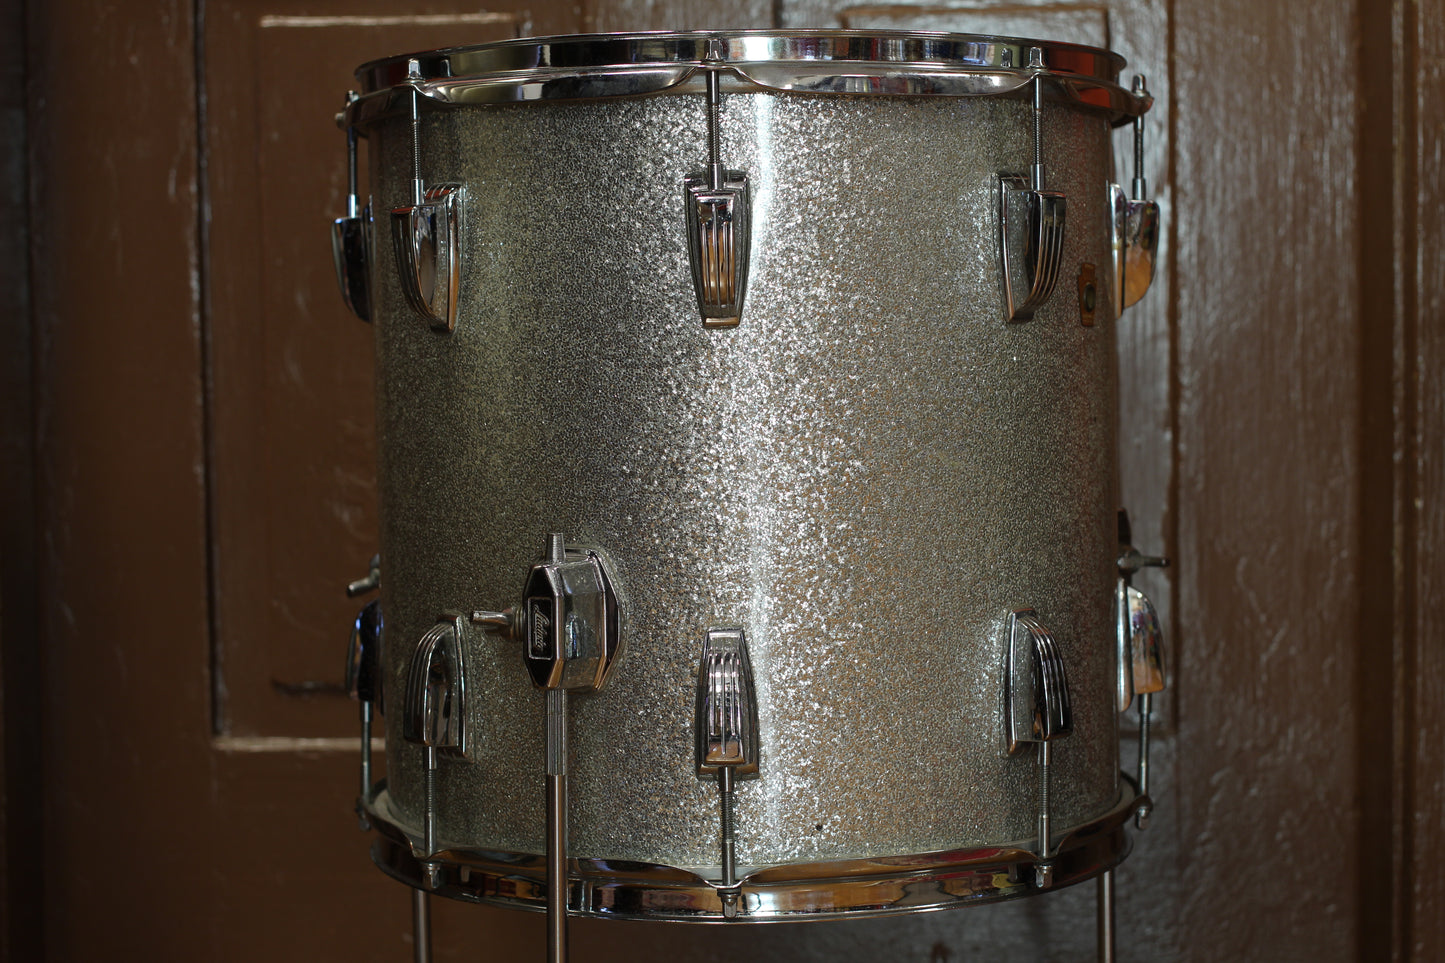 1969 Ludwig Jazzette in Blue & Silver Sparkle Tri-Band 12x18 14x14 8x12